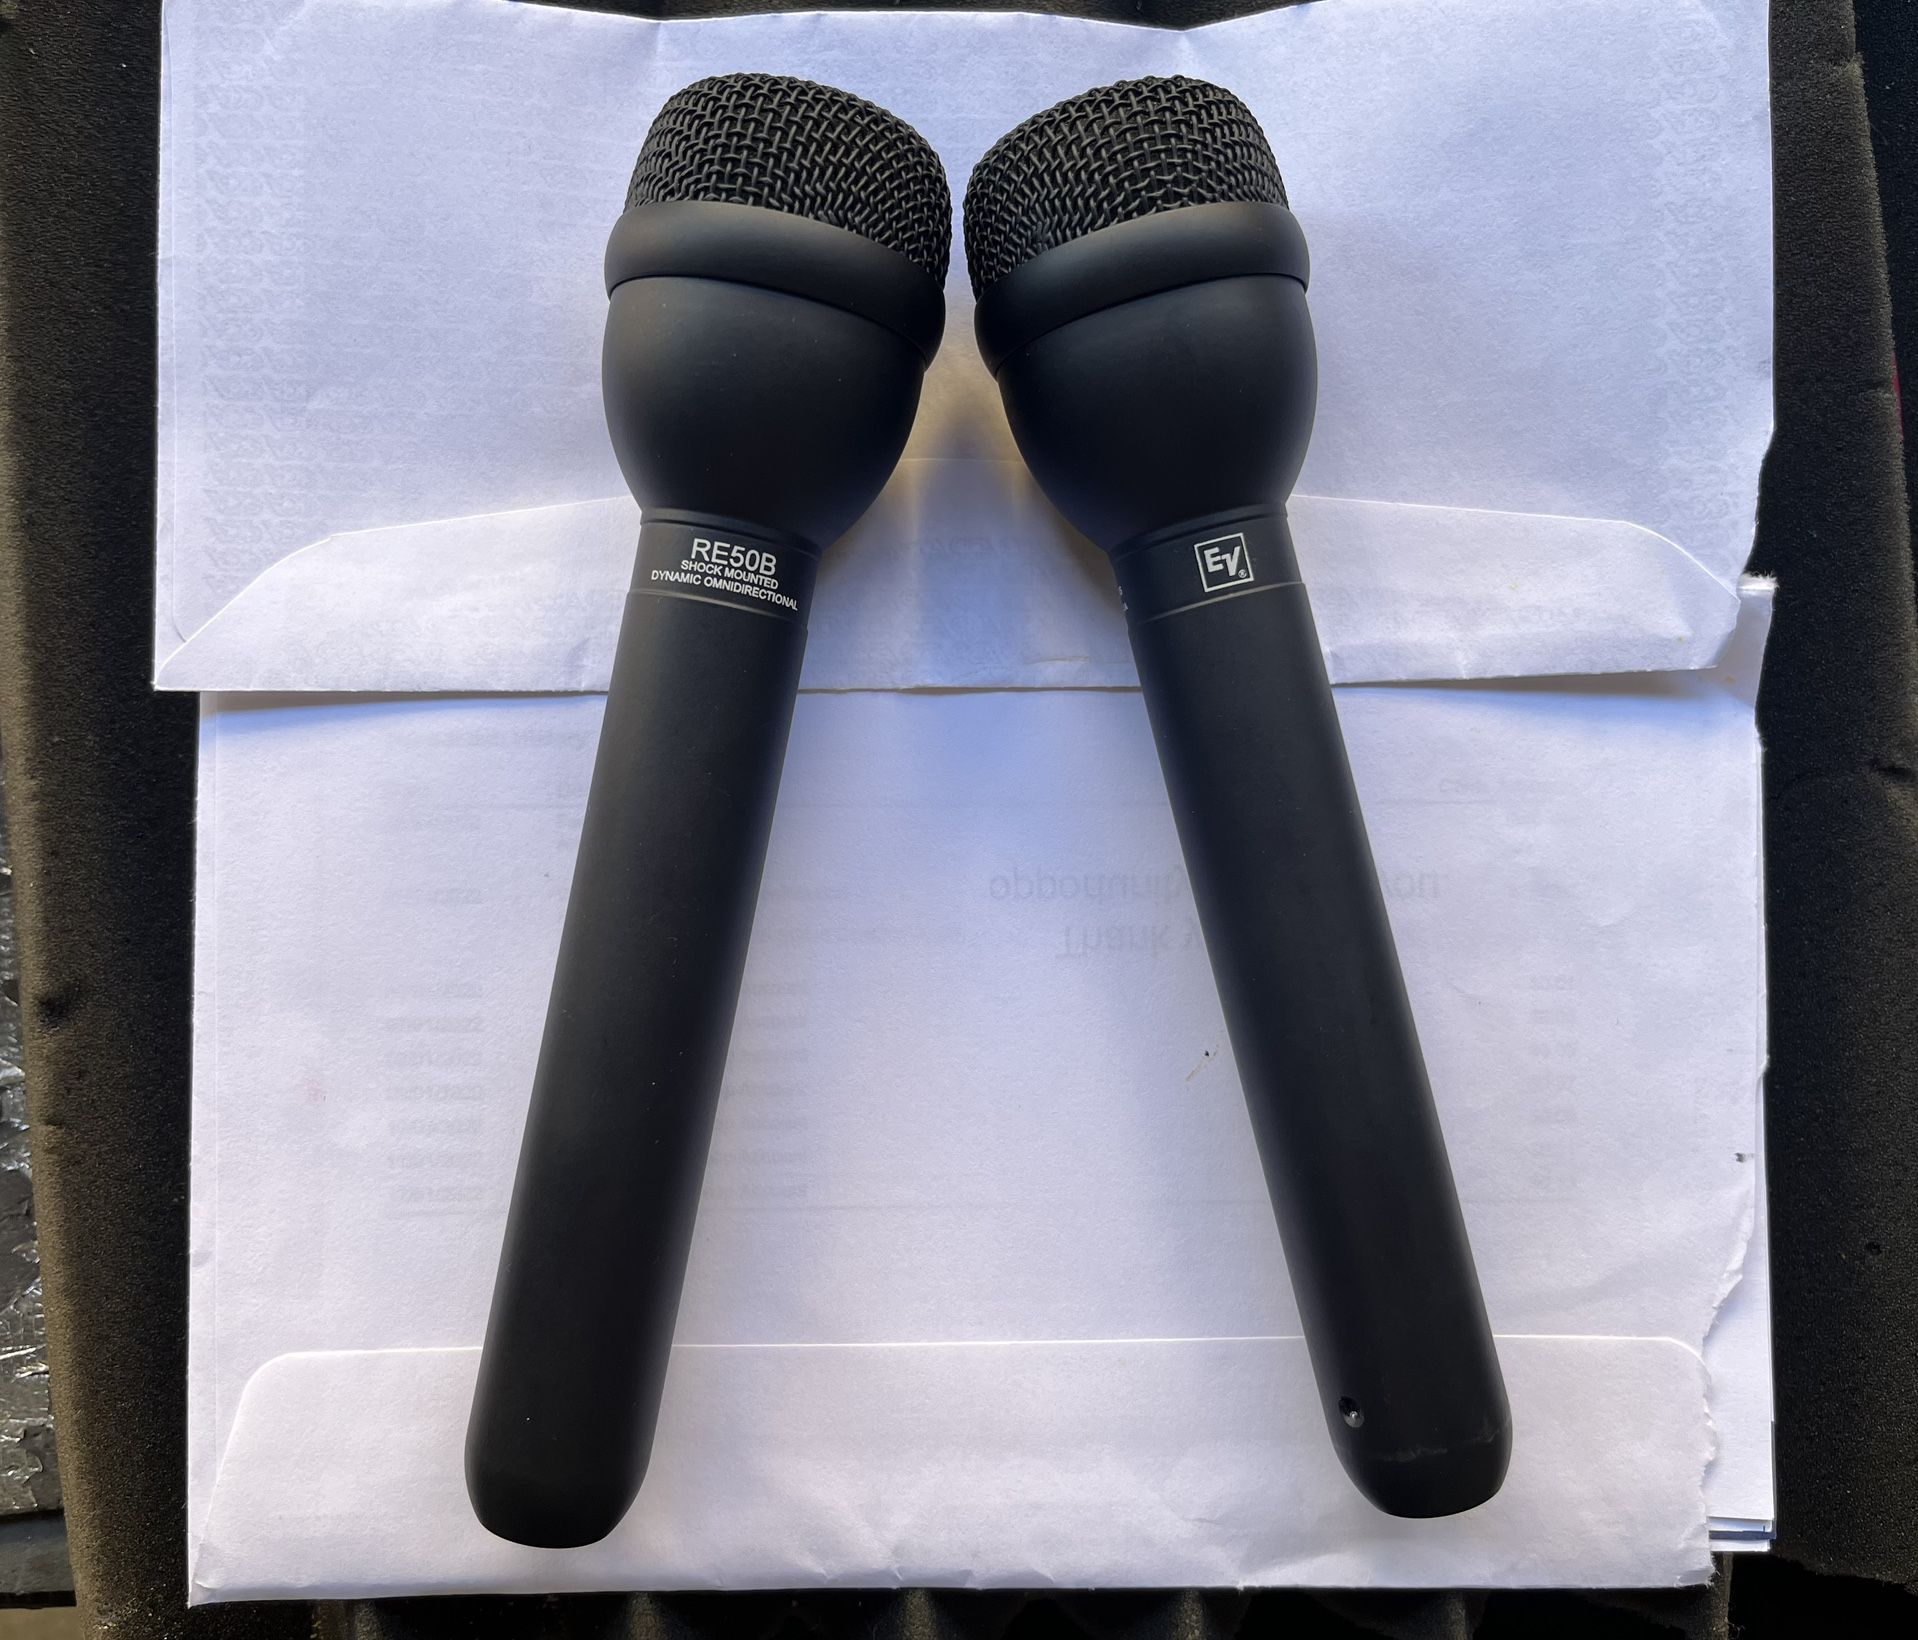 Electro-Voice RE50B Microphone for Sale in Hawthorne, CA OfferUp